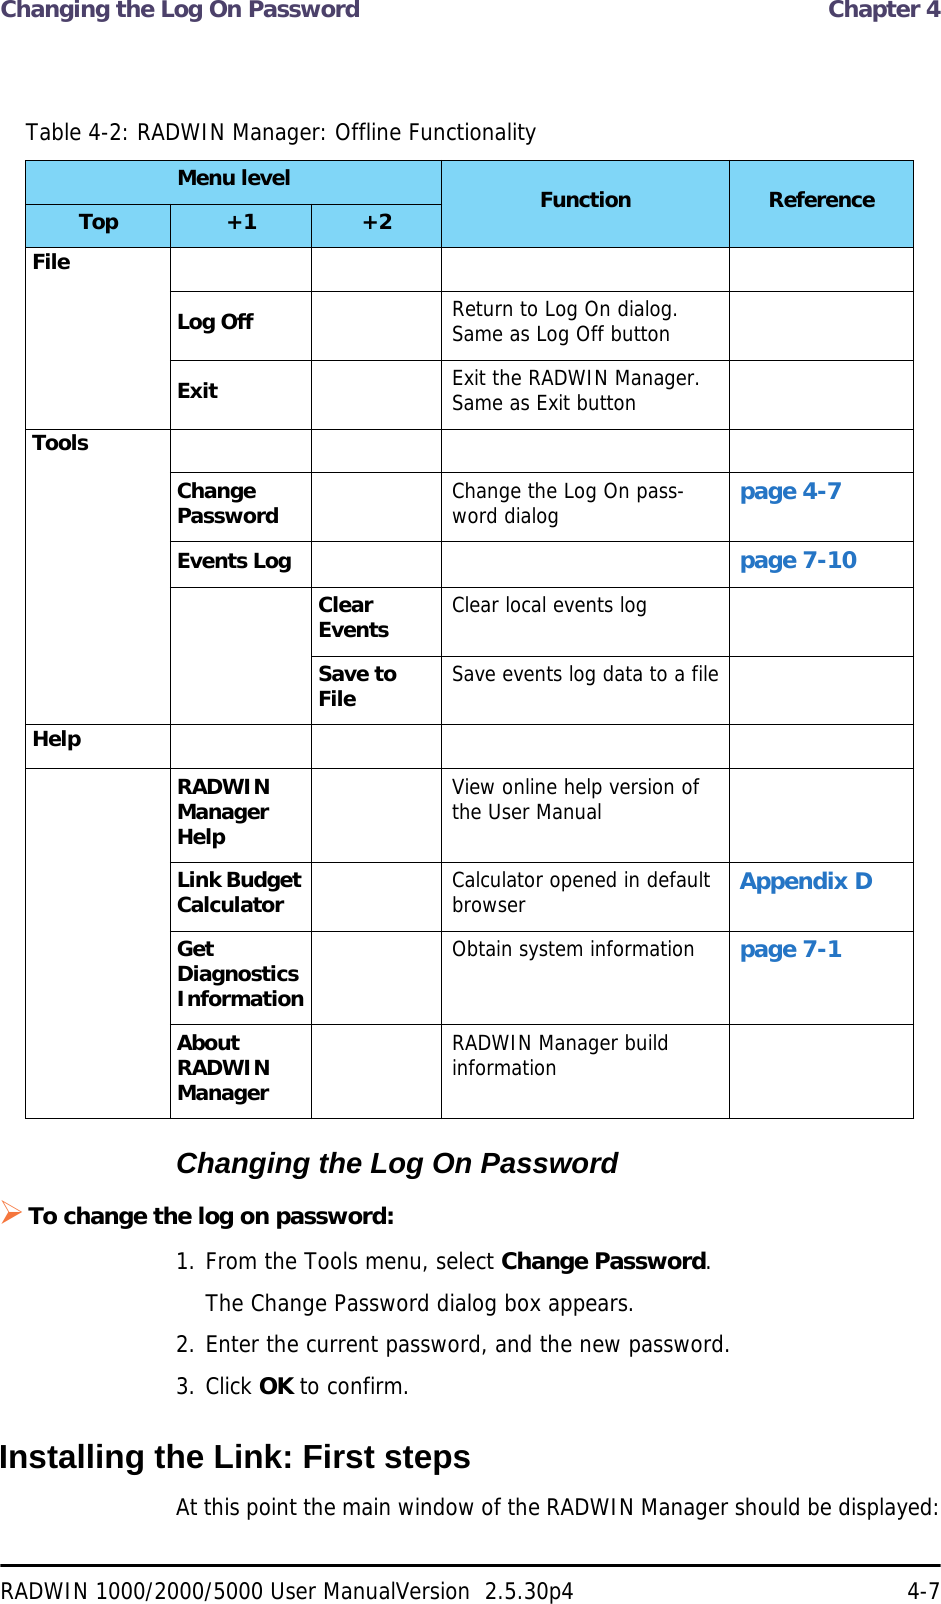 Changing the Log On Password  Chapter 4RADWIN 1000/2000/5000 User ManualVersion  2.5.30p4 4-7Changing the Log On PasswordTo change the log on password:1. From the Tools menu, select Change Password.The Change Password dialog box appears.2. Enter the current password, and the new password.3. Click OK to confirm.Installing the Link: First stepsAt this point the main window of the RADWIN Manager should be displayed:Table 4-2: RADWIN Manager: Offline FunctionalityMenu level Function ReferenceTop +1 +2FileLog Off Return to Log On dialog. Same as Log Off buttonExit Exit the RADWIN Manager. Same as Exit buttonToolsChange Password Change the Log On pass-word dialog page 4-7Events Log page 7-10Clear Events Clear local events logSave to File Save events log data to a fileHelpRADWIN Manager HelpView online help version of the User ManualLink Budget Calculator Calculator opened in default browser Appendix DGet Diagnostics InformationObtain system information page 7-1About RADWIN ManagerRADWIN Manager build information